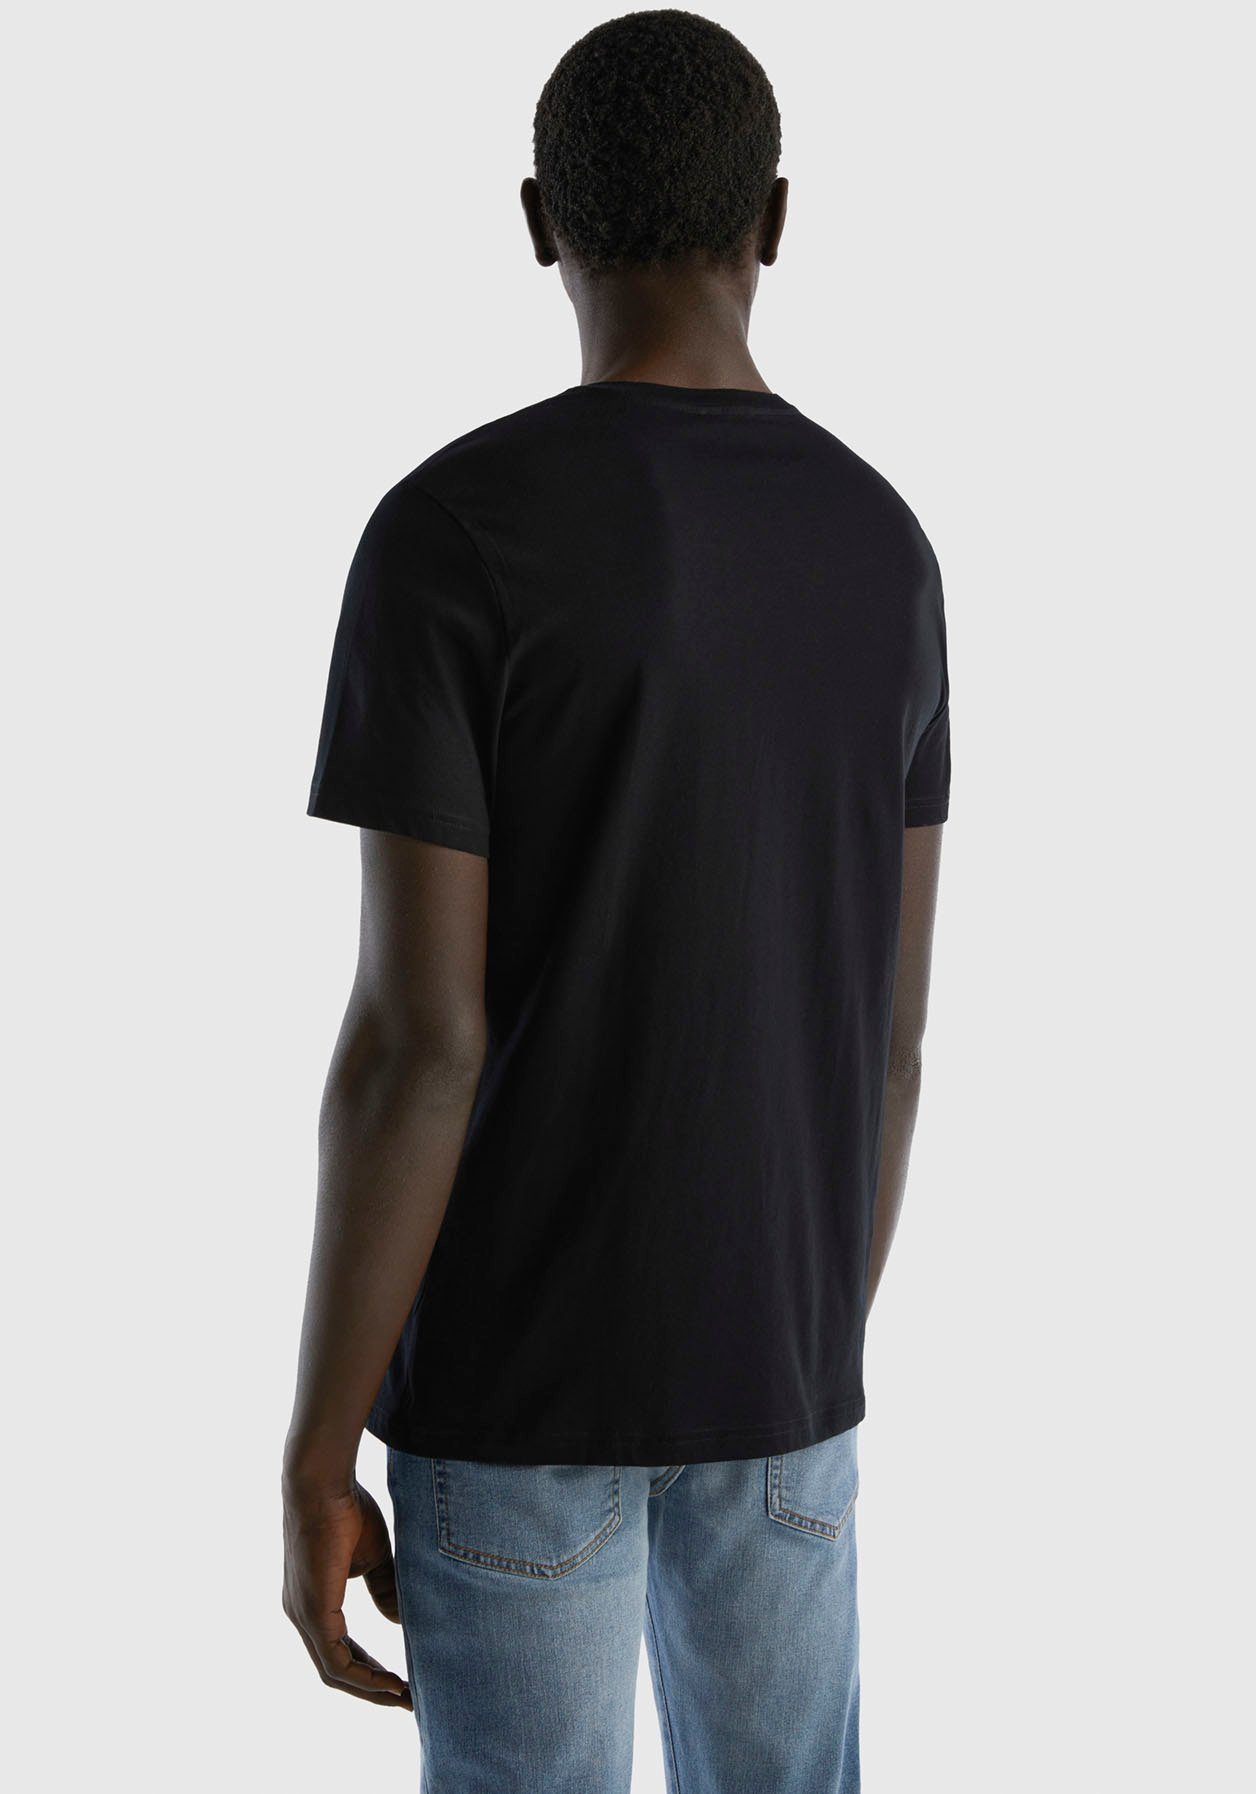 United Colors of Benetton T-Shirt in cleaner Basic-Form schwarz